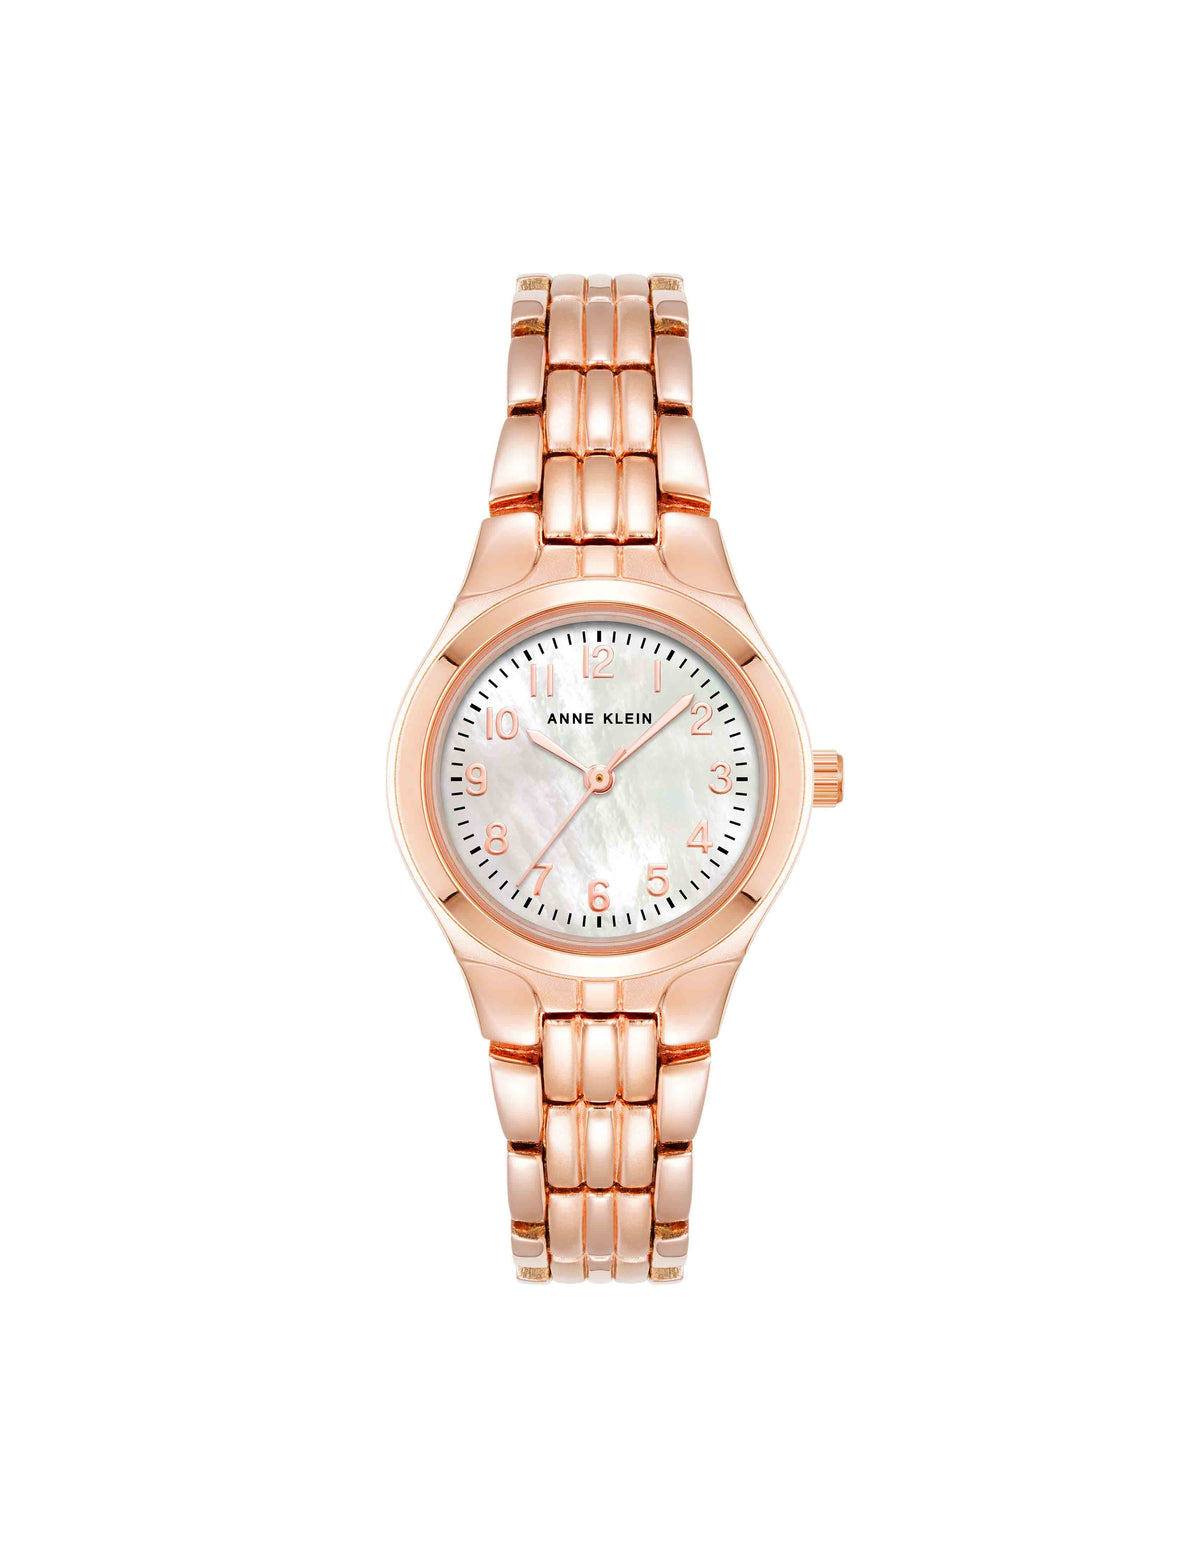 Anne Klein Rose Gold-Tone Classic Easy To Read Dial Watch